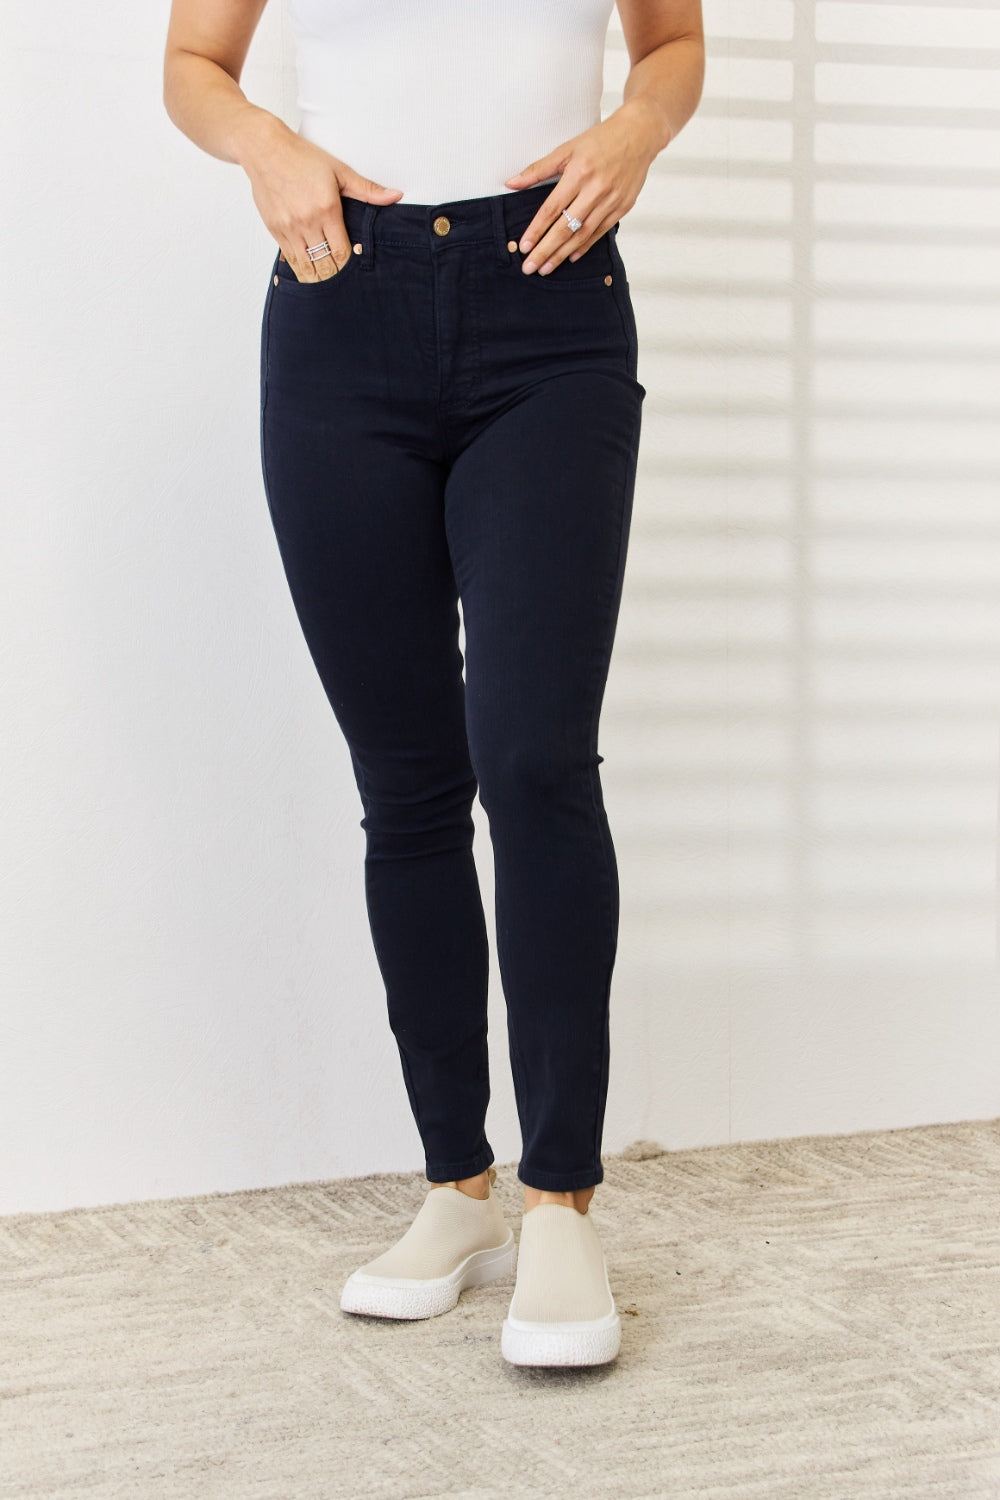 Judy Blue Tummy Control Navy Skinny Jeans - Inspired Eye Boutique